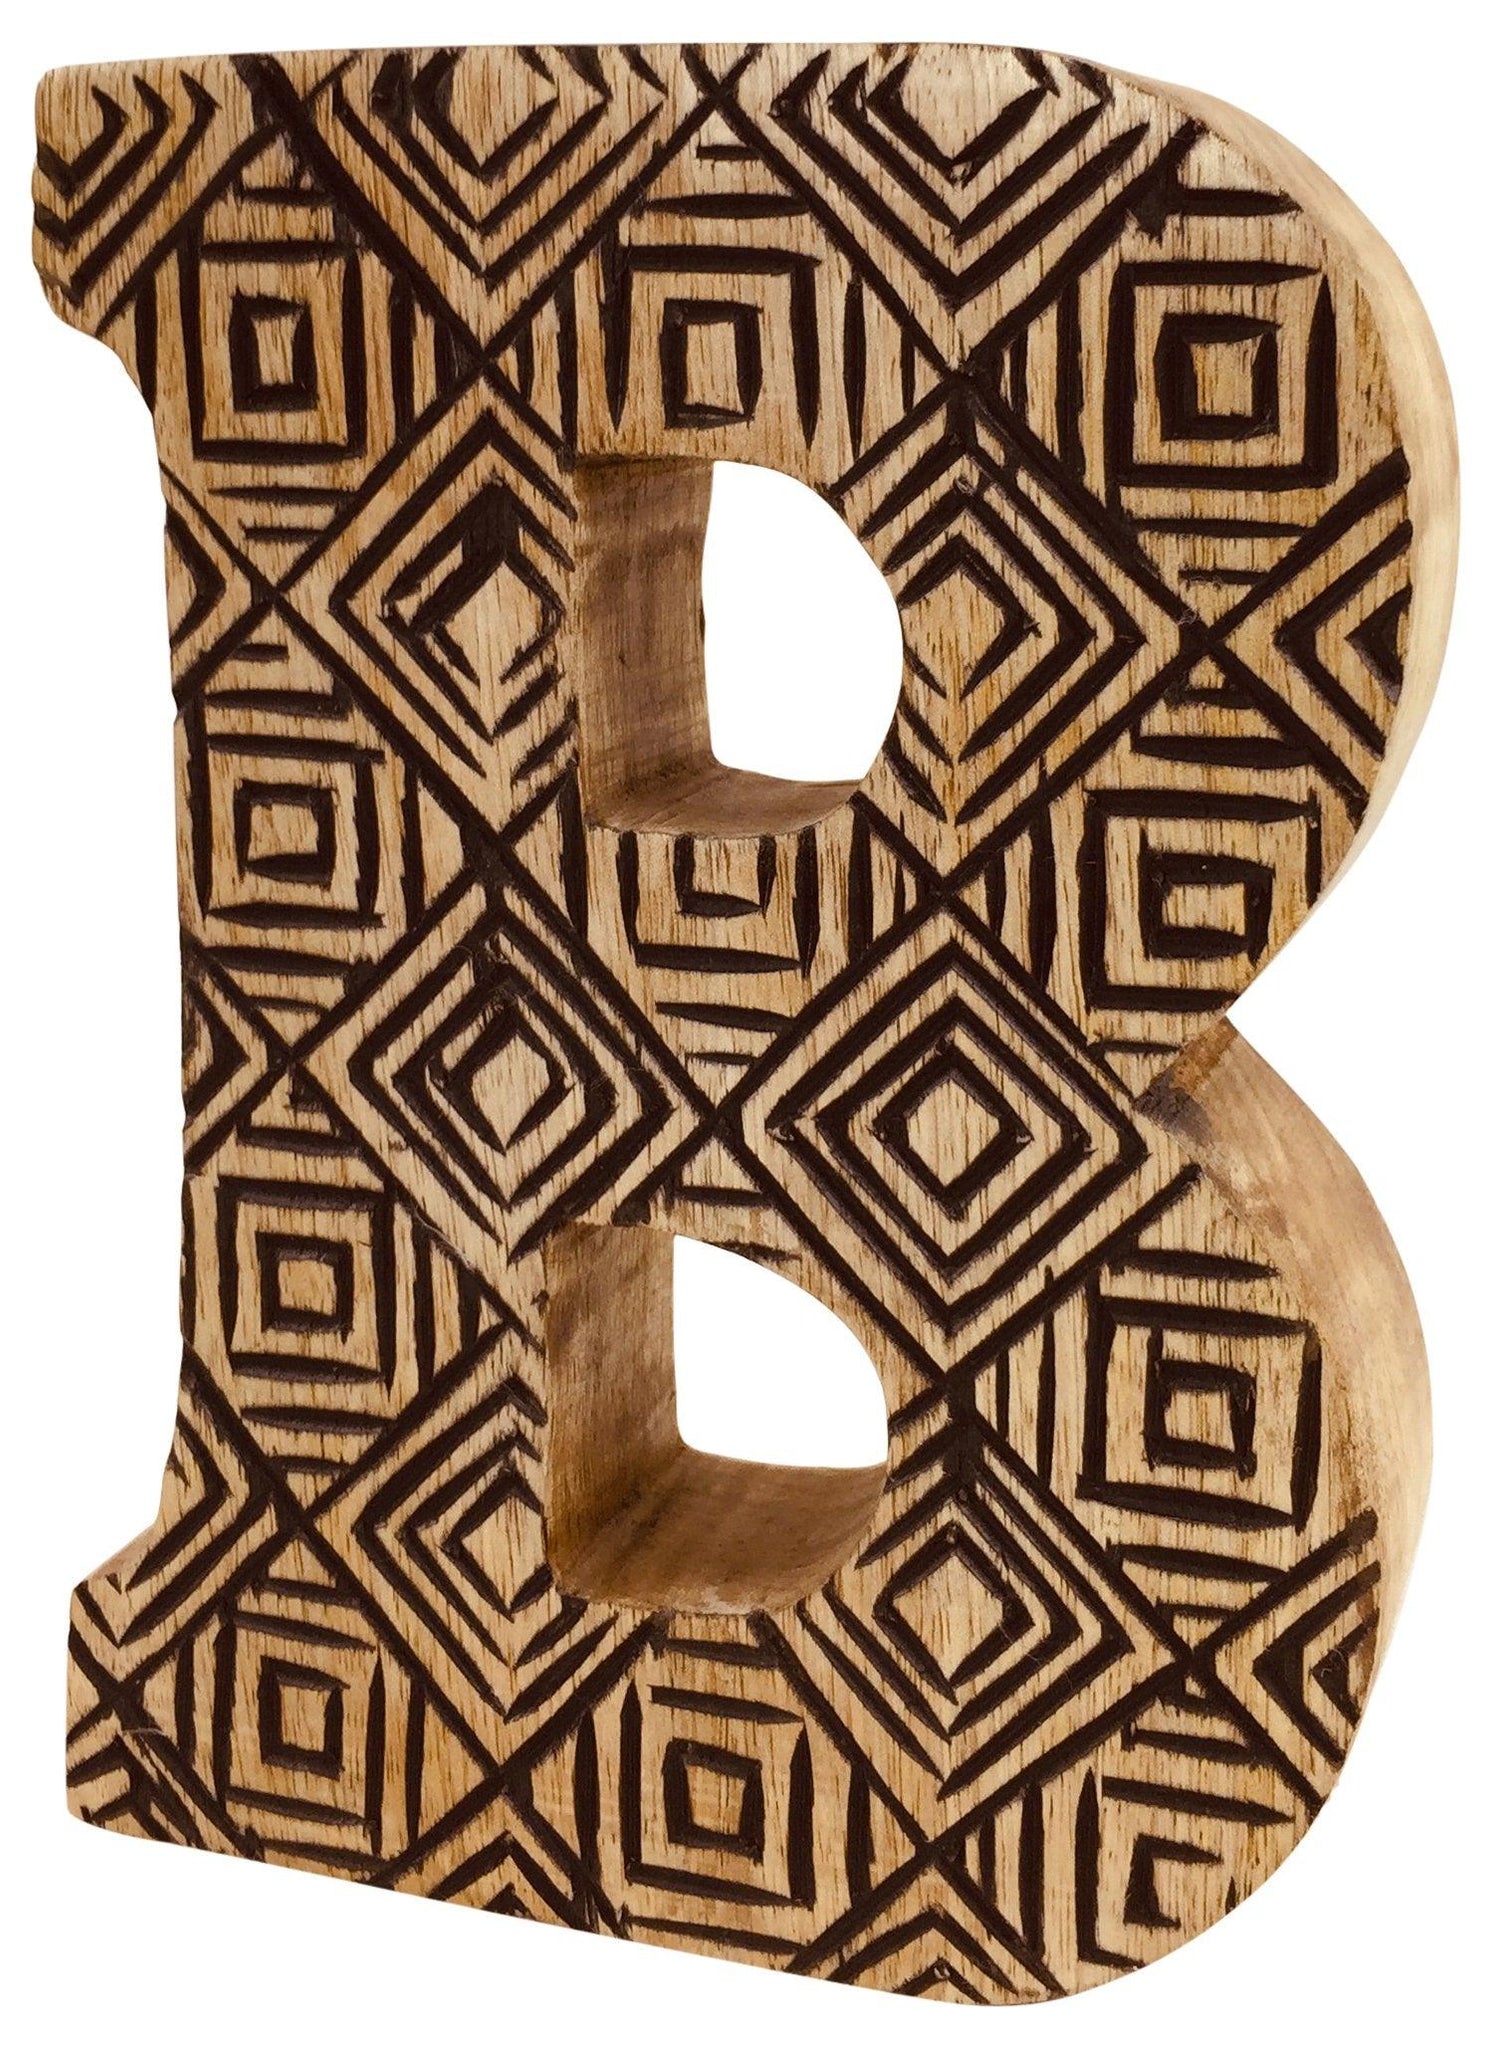 Hand Carved Wooden Geometric Letter B - £12.99 - Single Letters 